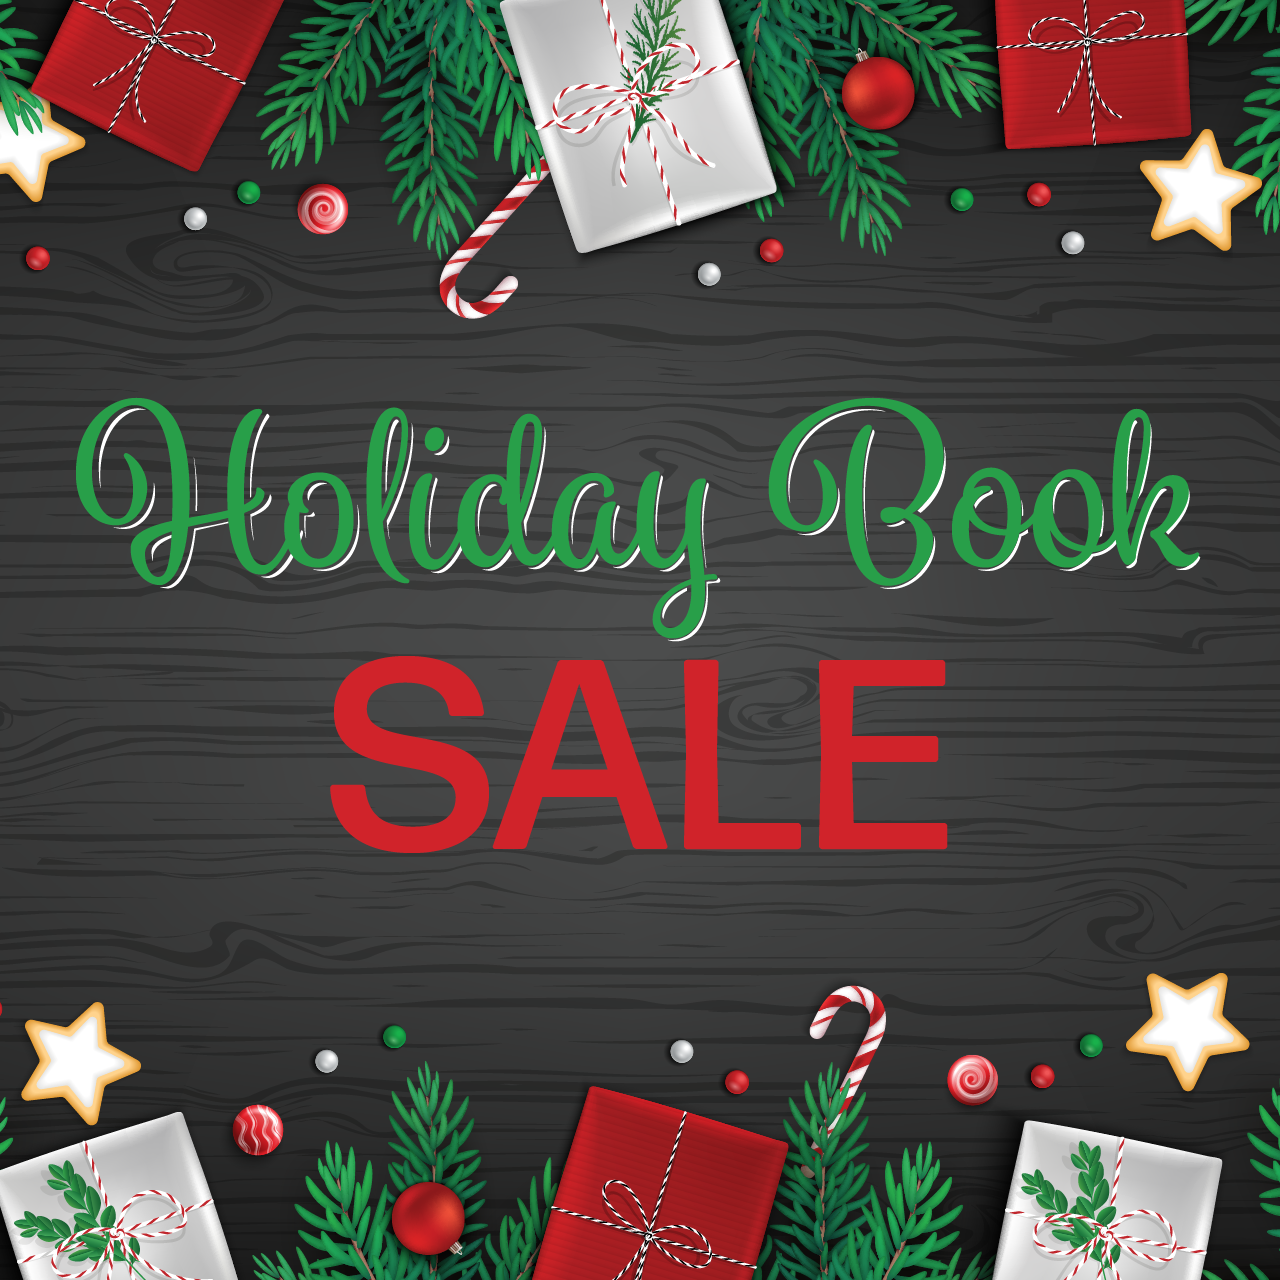 Holiday Book Sale graphic with presents, candy canes, pine branches, and ornaments.